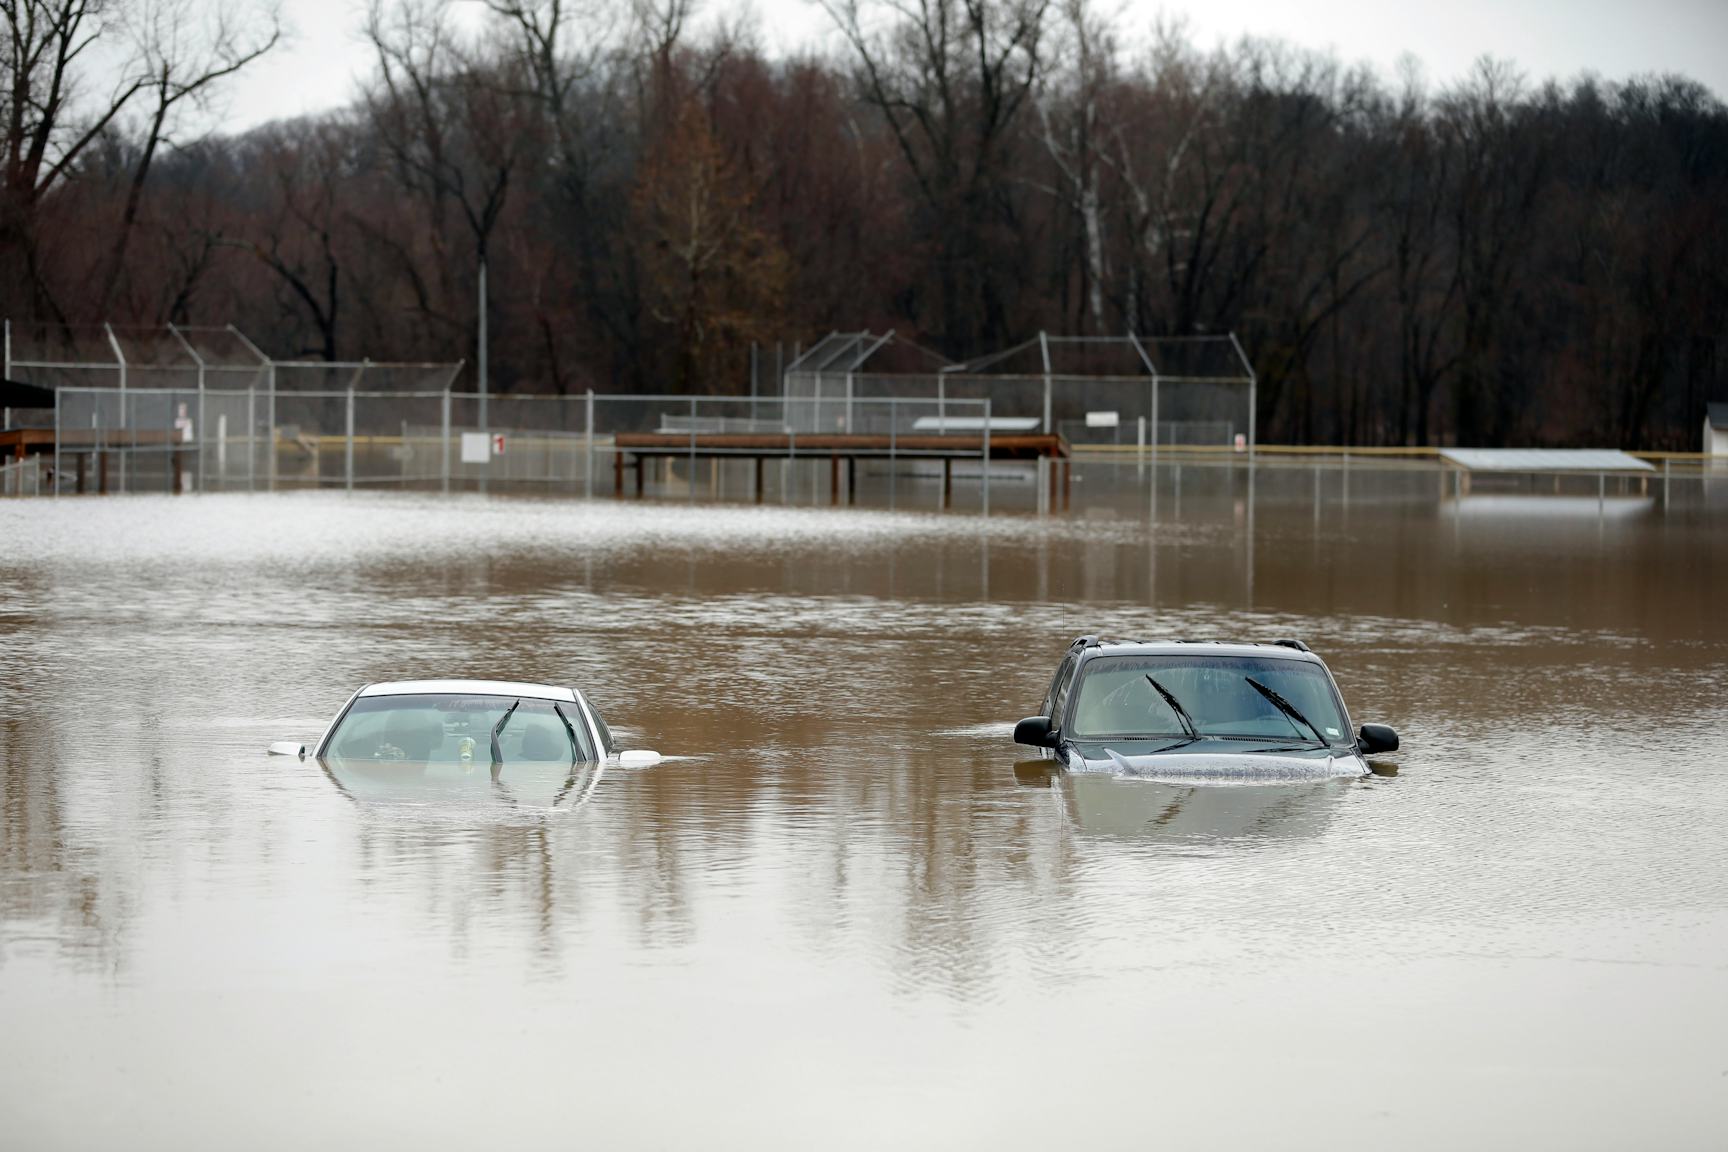 Photos of Flooding in Missouri Show Aftermath of Severe Storm Now